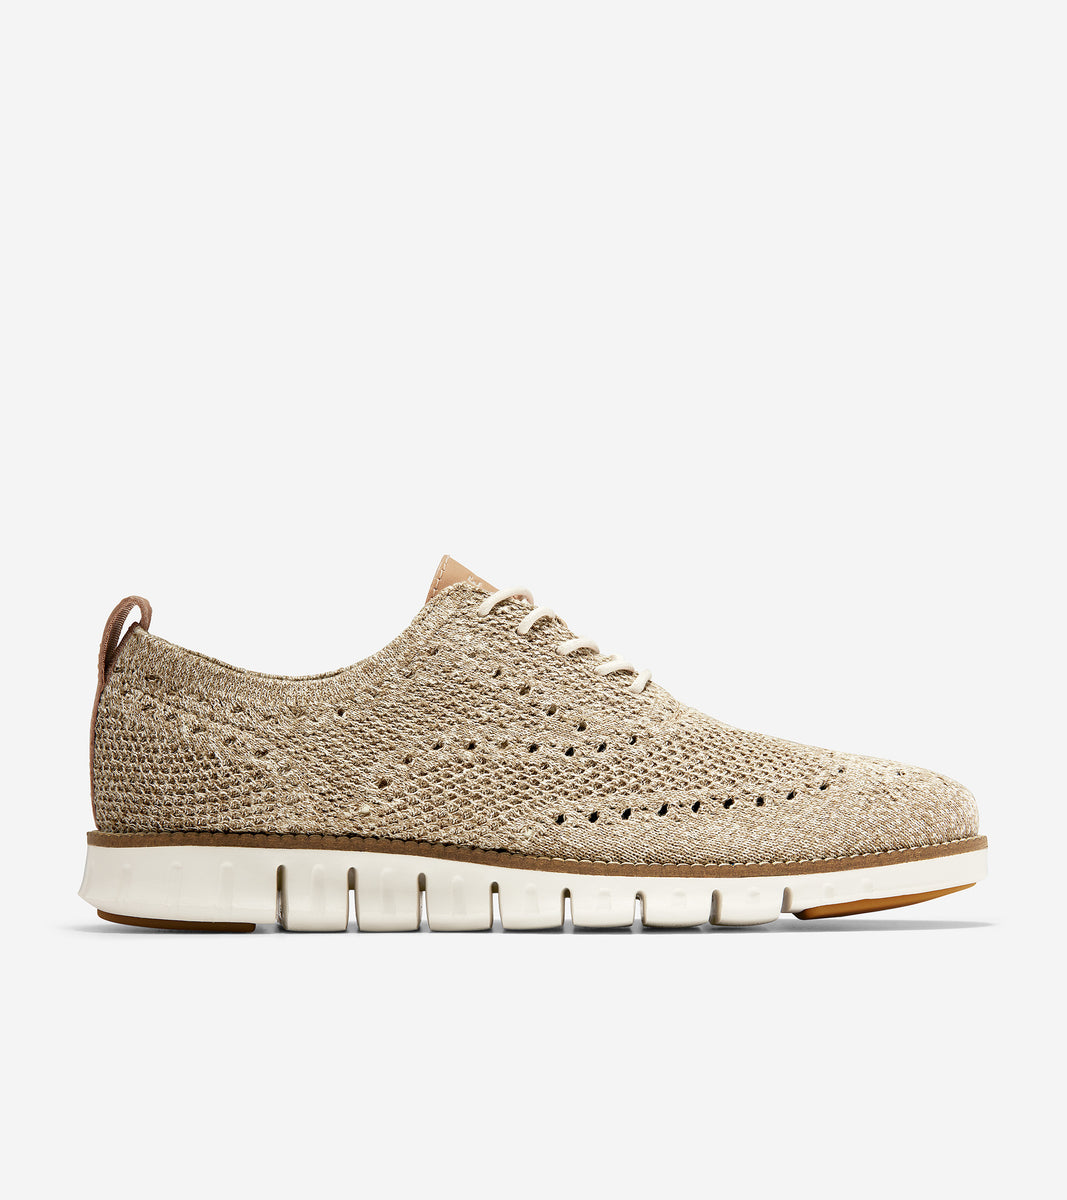 Cole Haan Unveils Their Next Big Thing with ZeroGrand